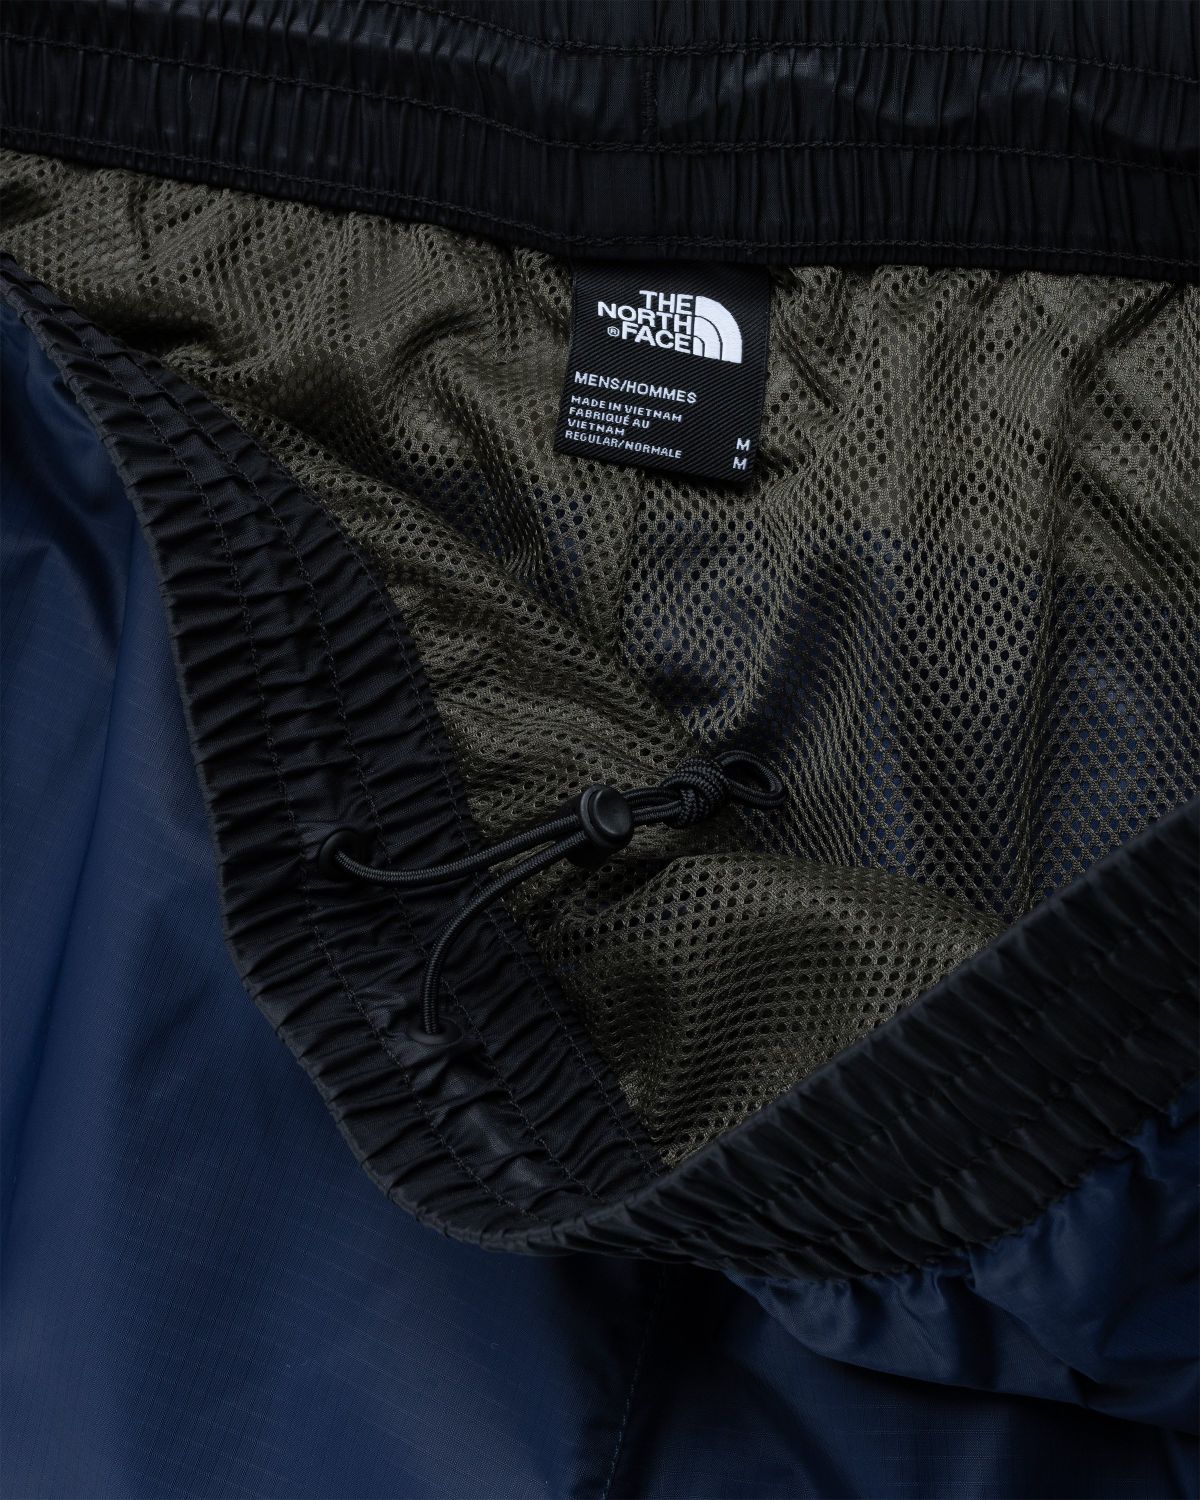 The North Face – TNF X Shorts Blue - Shorts - Blue - Image 4